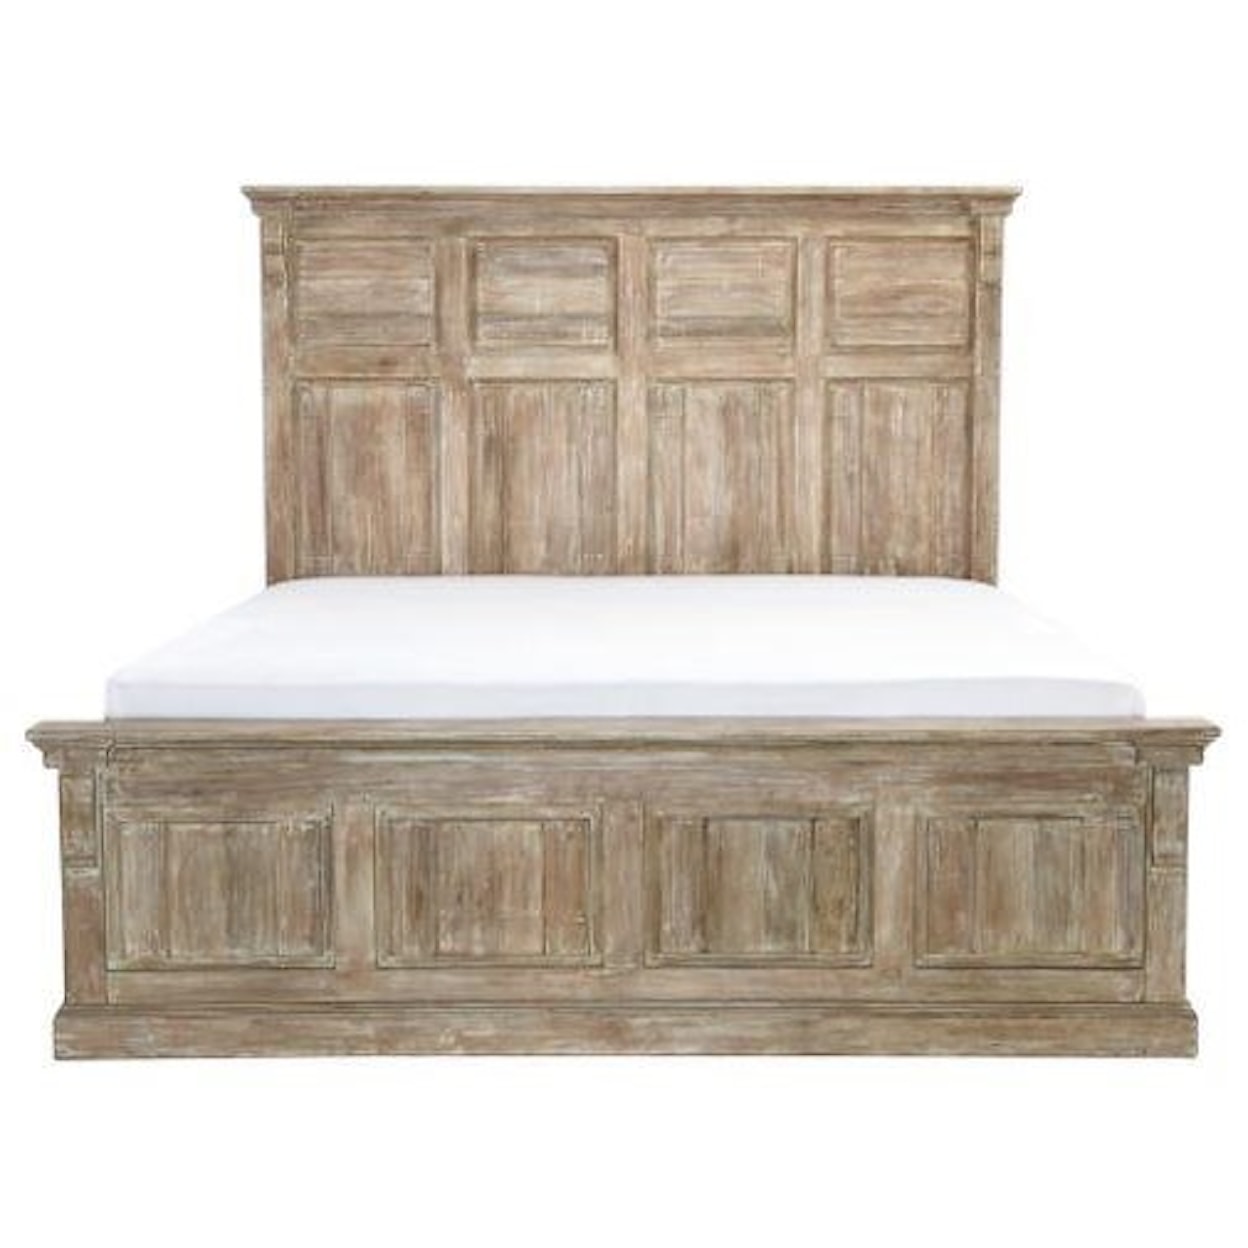 Classic Home Adelaide ADELAIDE CAL KING BED